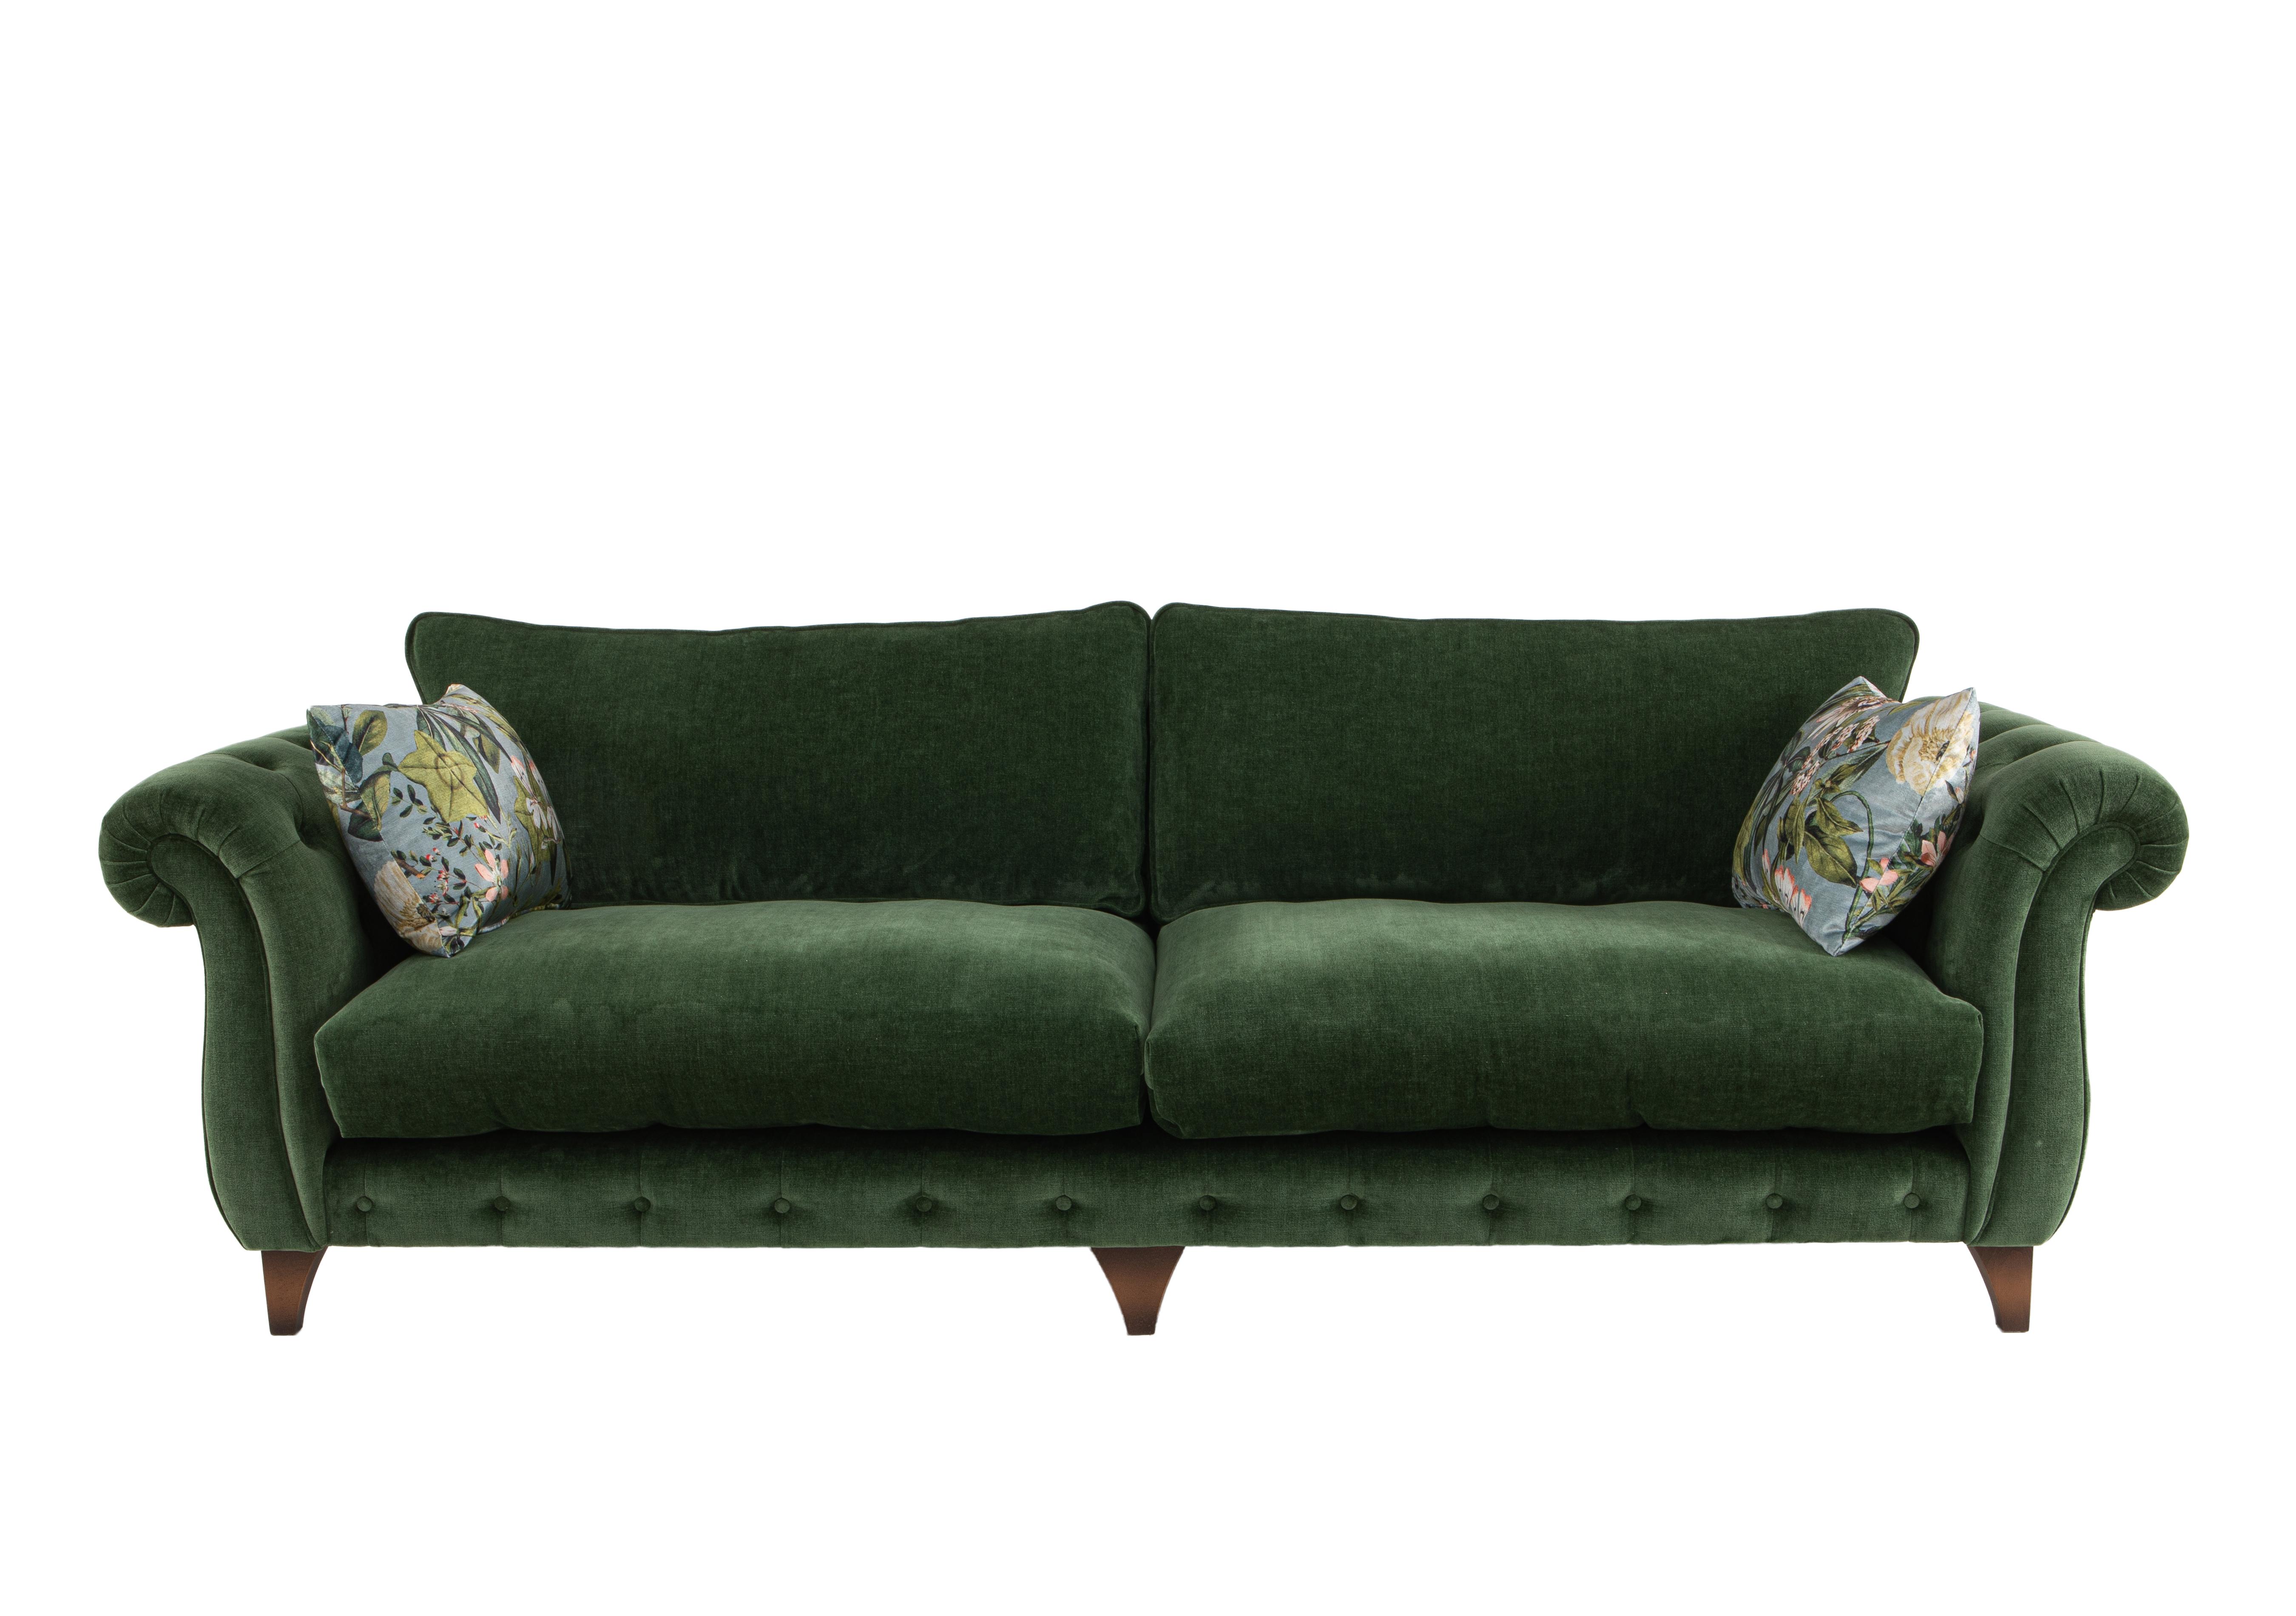 Boutique Palace Fabric Grande Classic Back Sofa in Oasis Parrot on Furniture Village